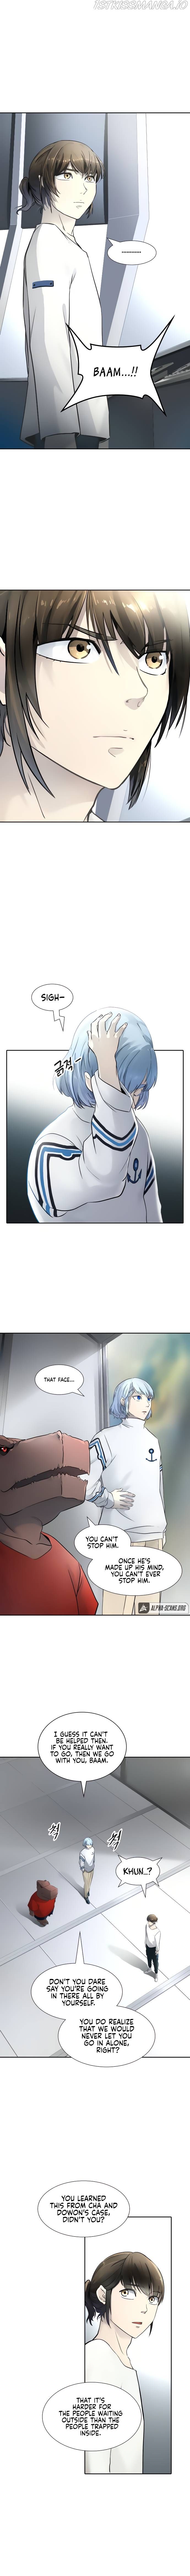 Tower of God Chapter 516 - Page 7